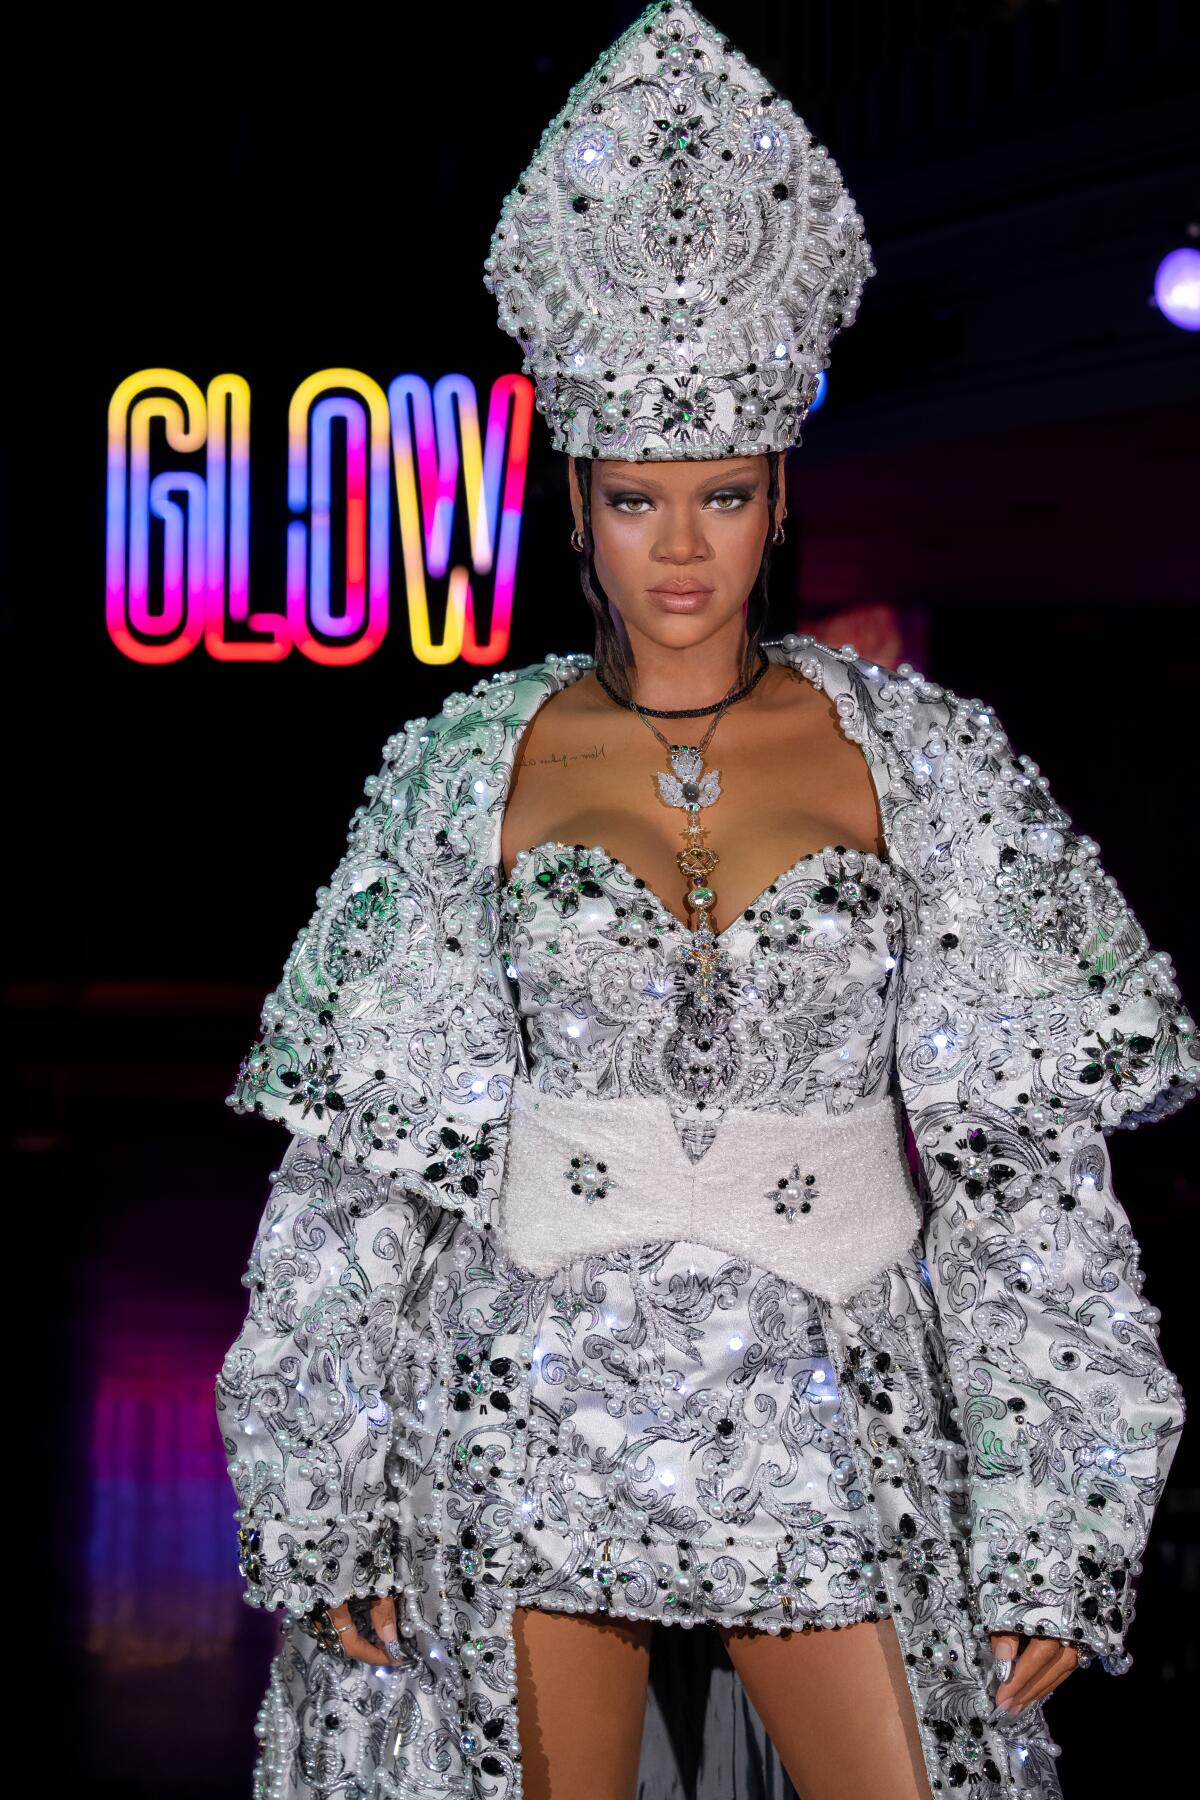 How Rihanna's Stylist Crafted Her Super Bowl Look – While Keeping